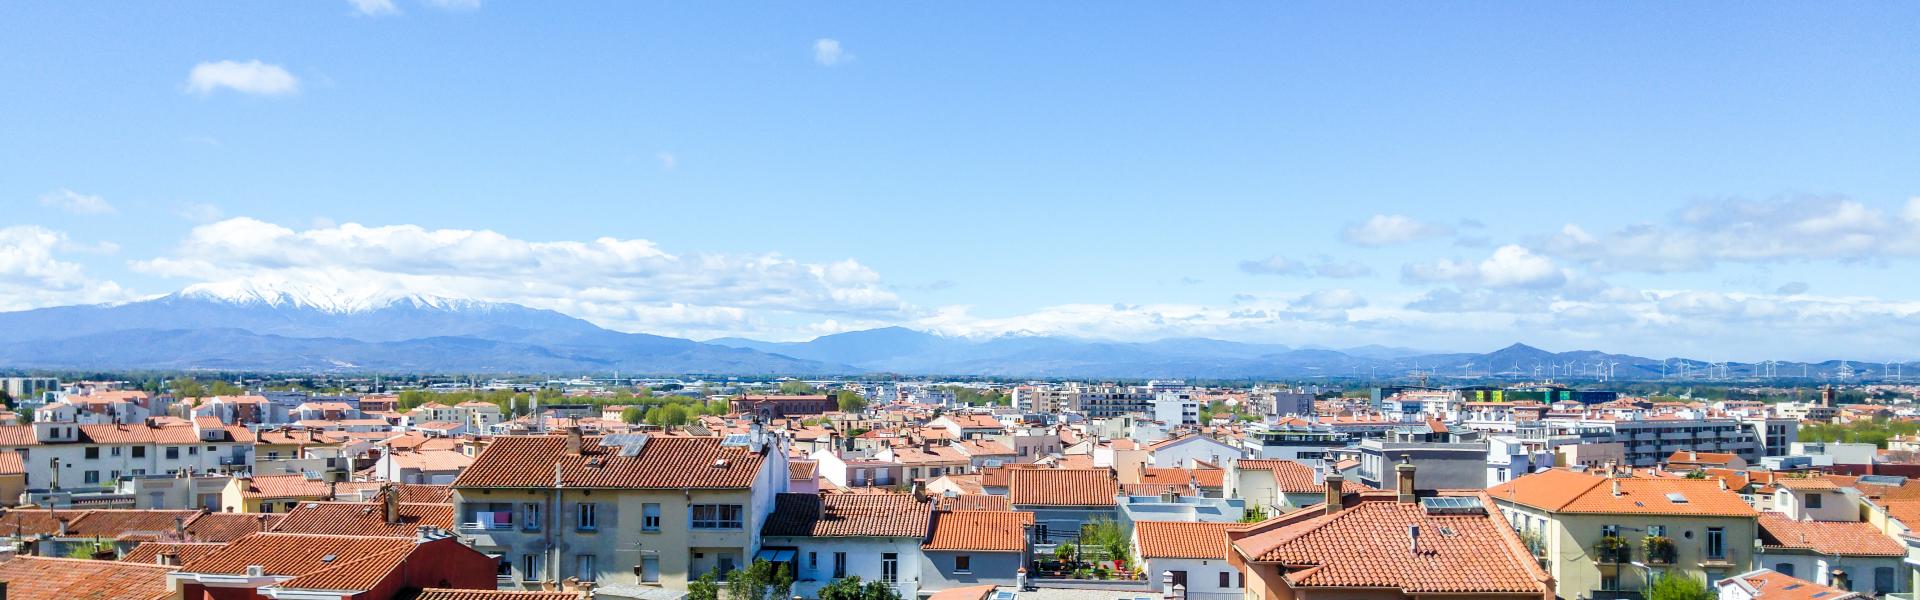 Find the perfect vacation home in Perpignan - Casamundo